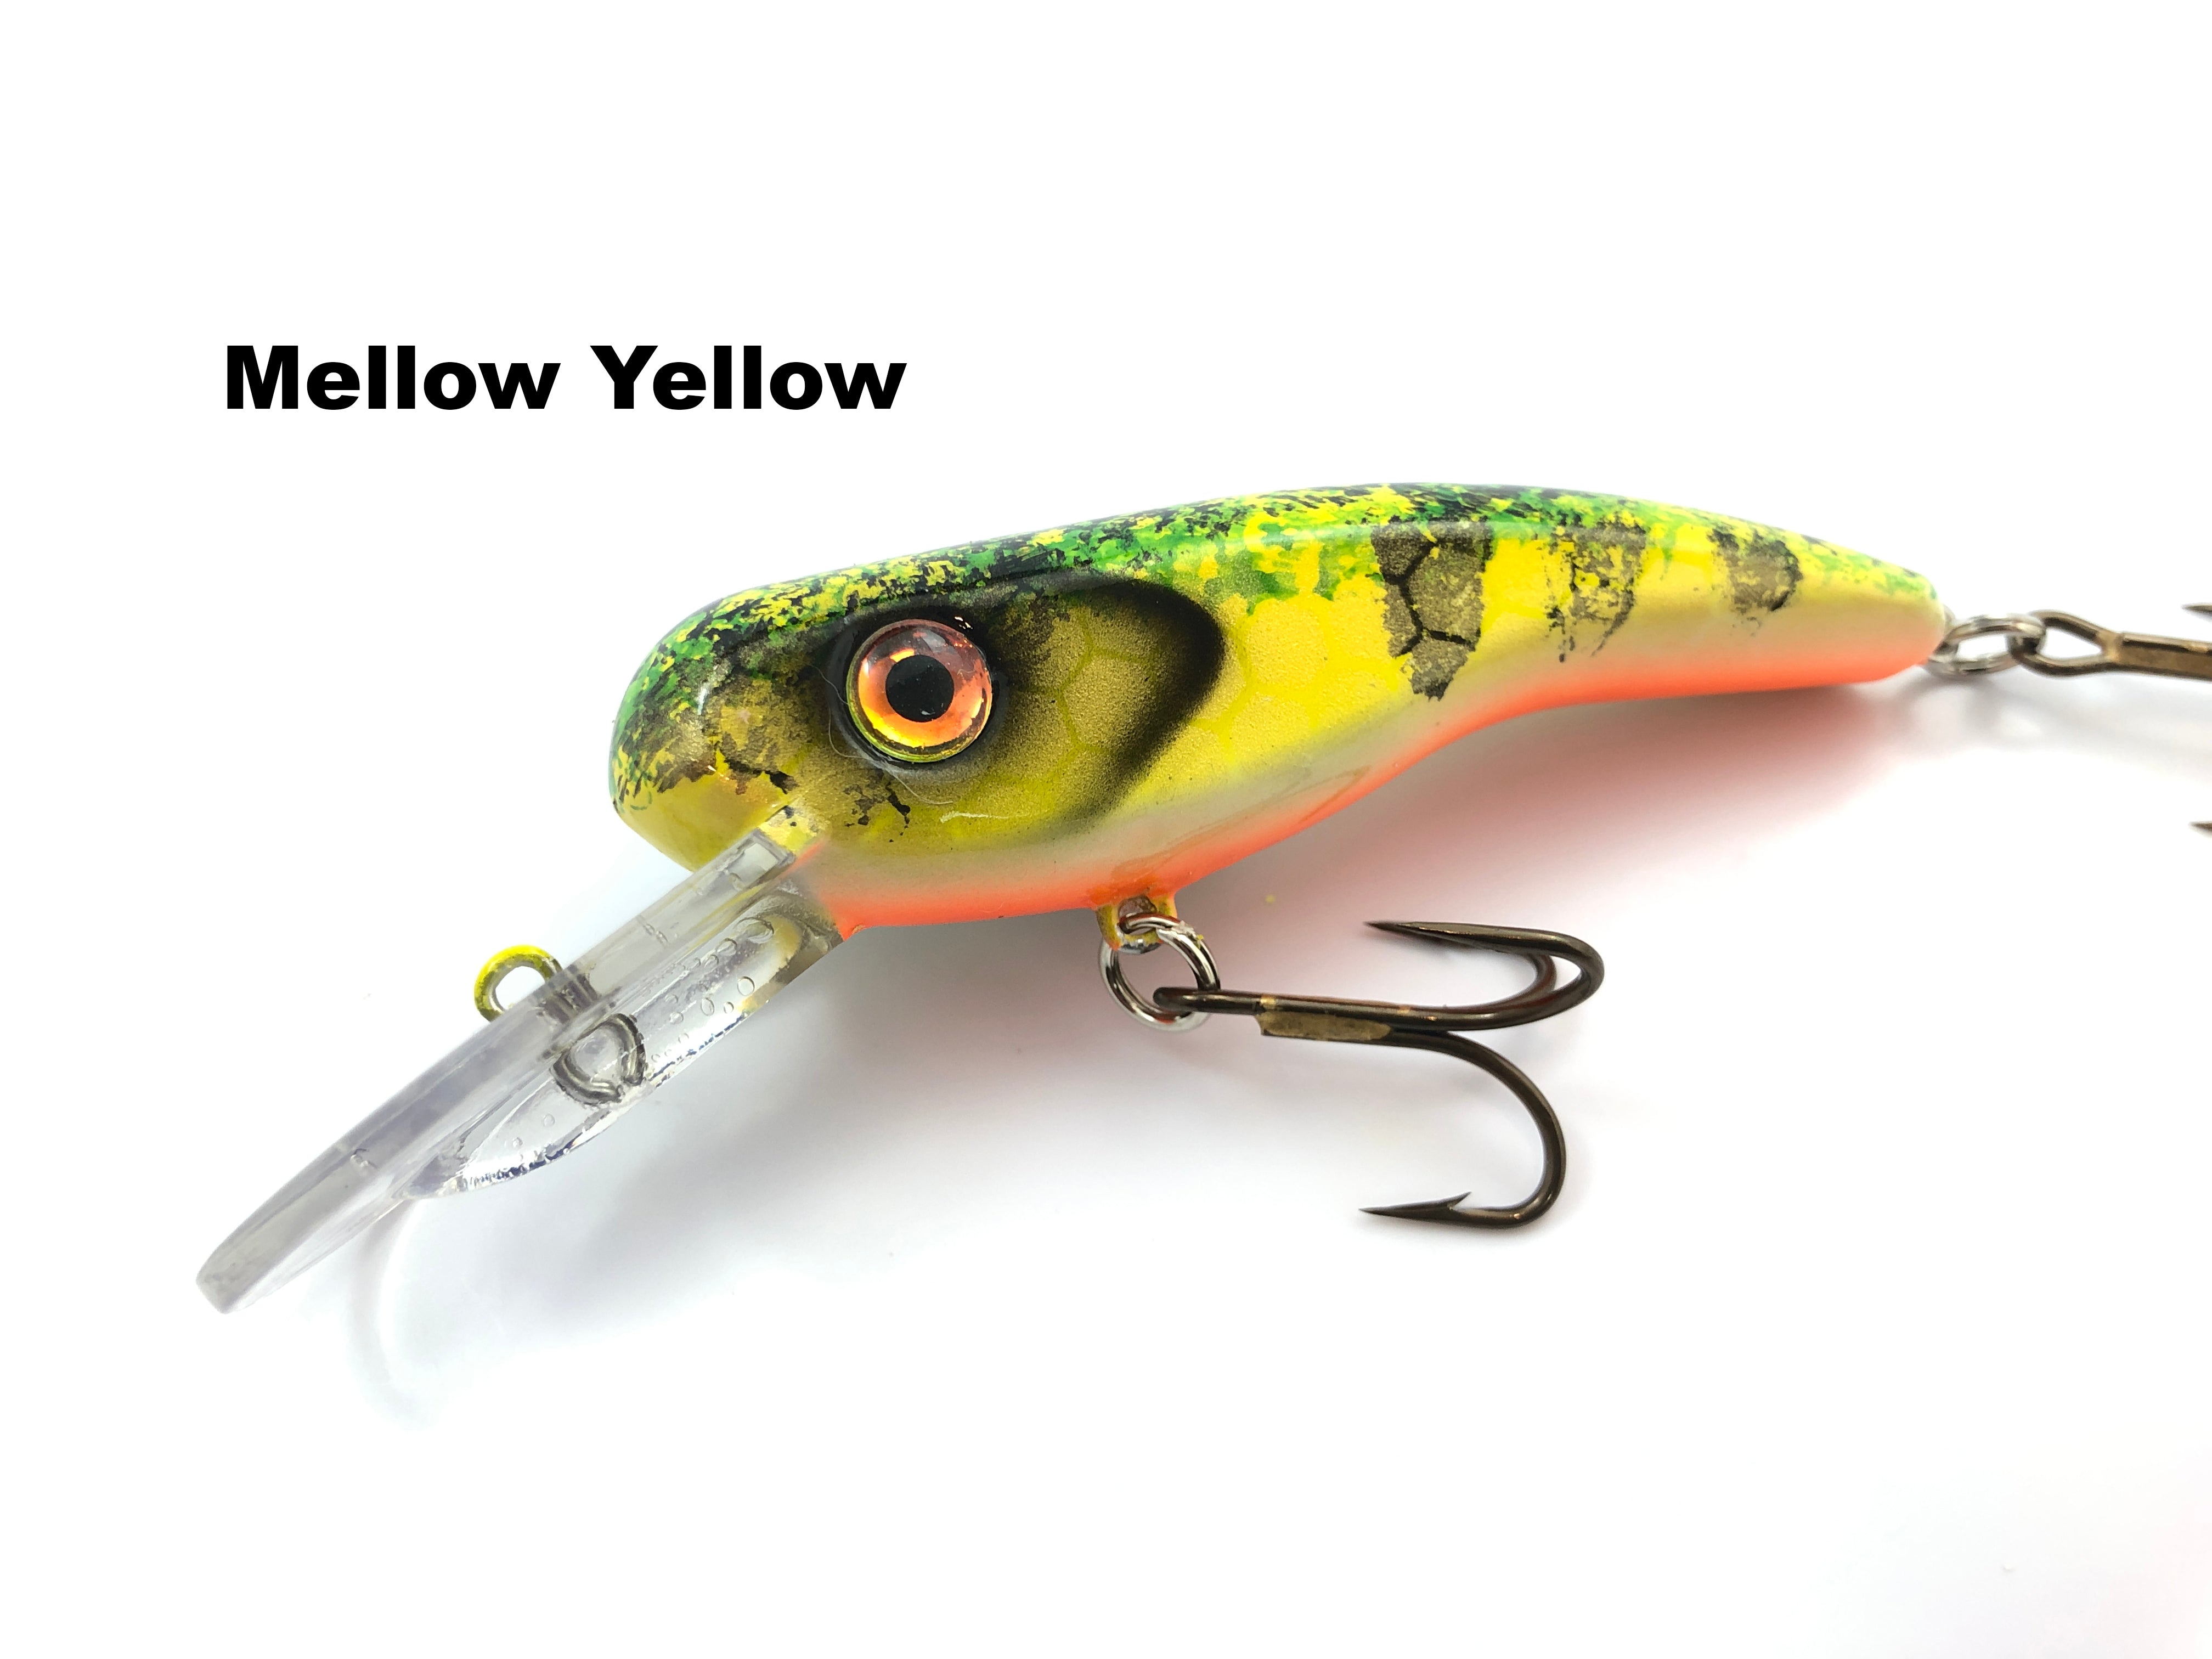 Legion Lure Small Short Bill Minnow Bait in (SP88S-FP-383) Camo Commander -  Yellow Bird Fishing Products